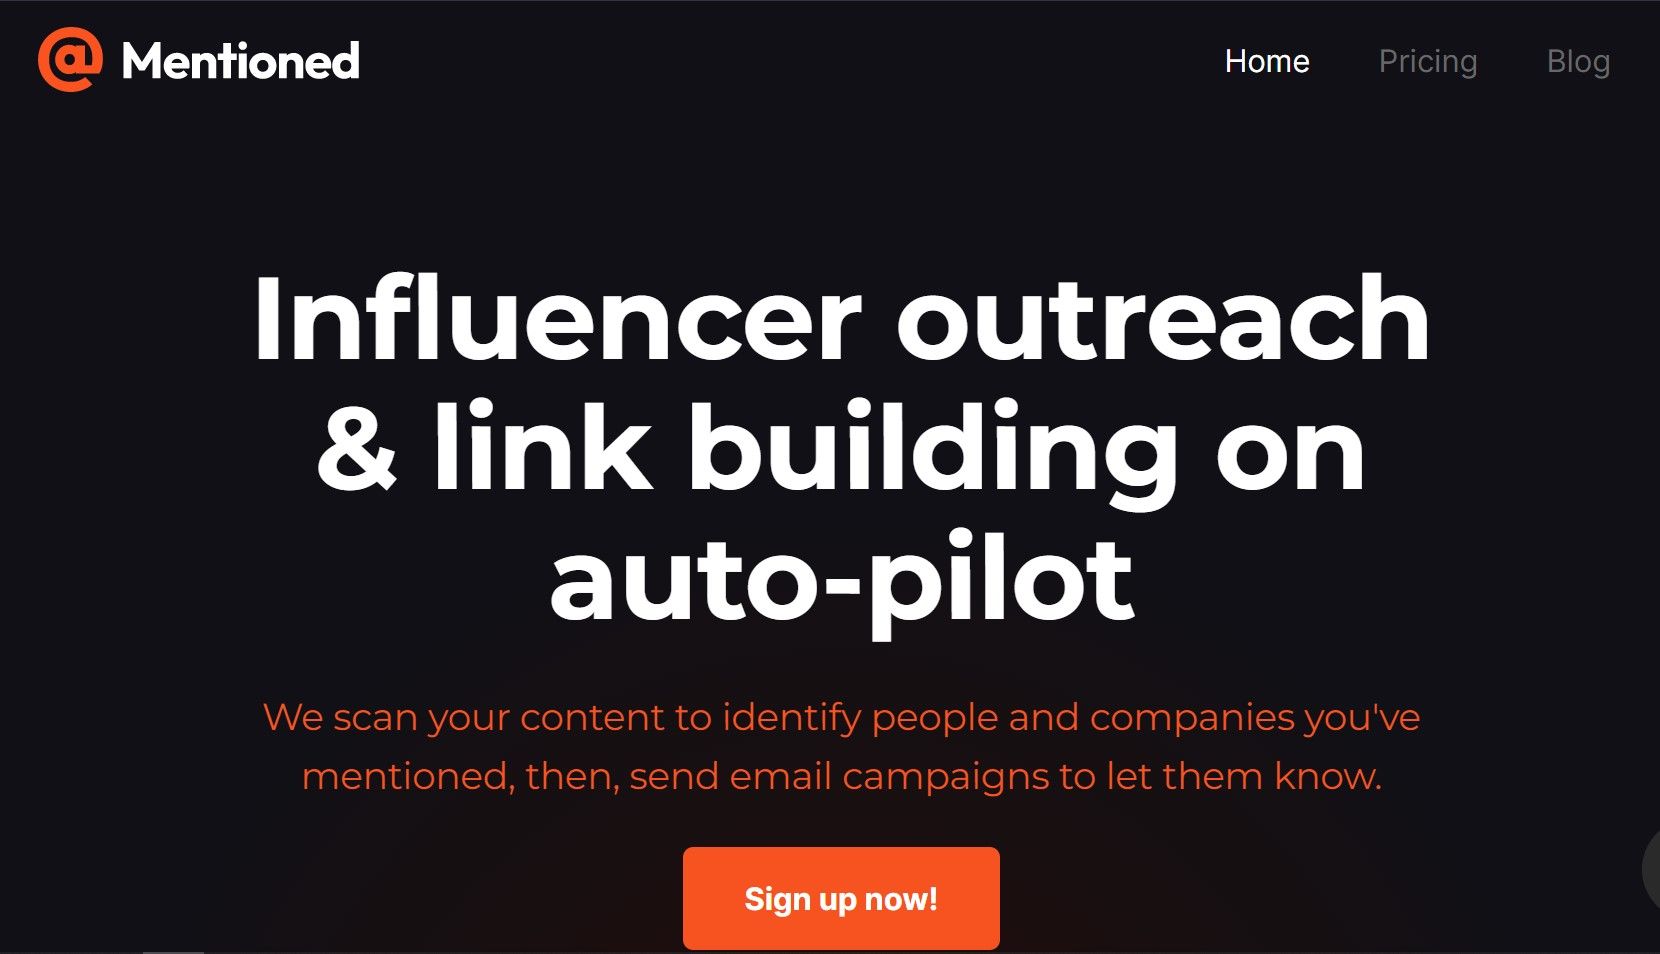 MentionedThis tool automates the process of reaching out to influencers